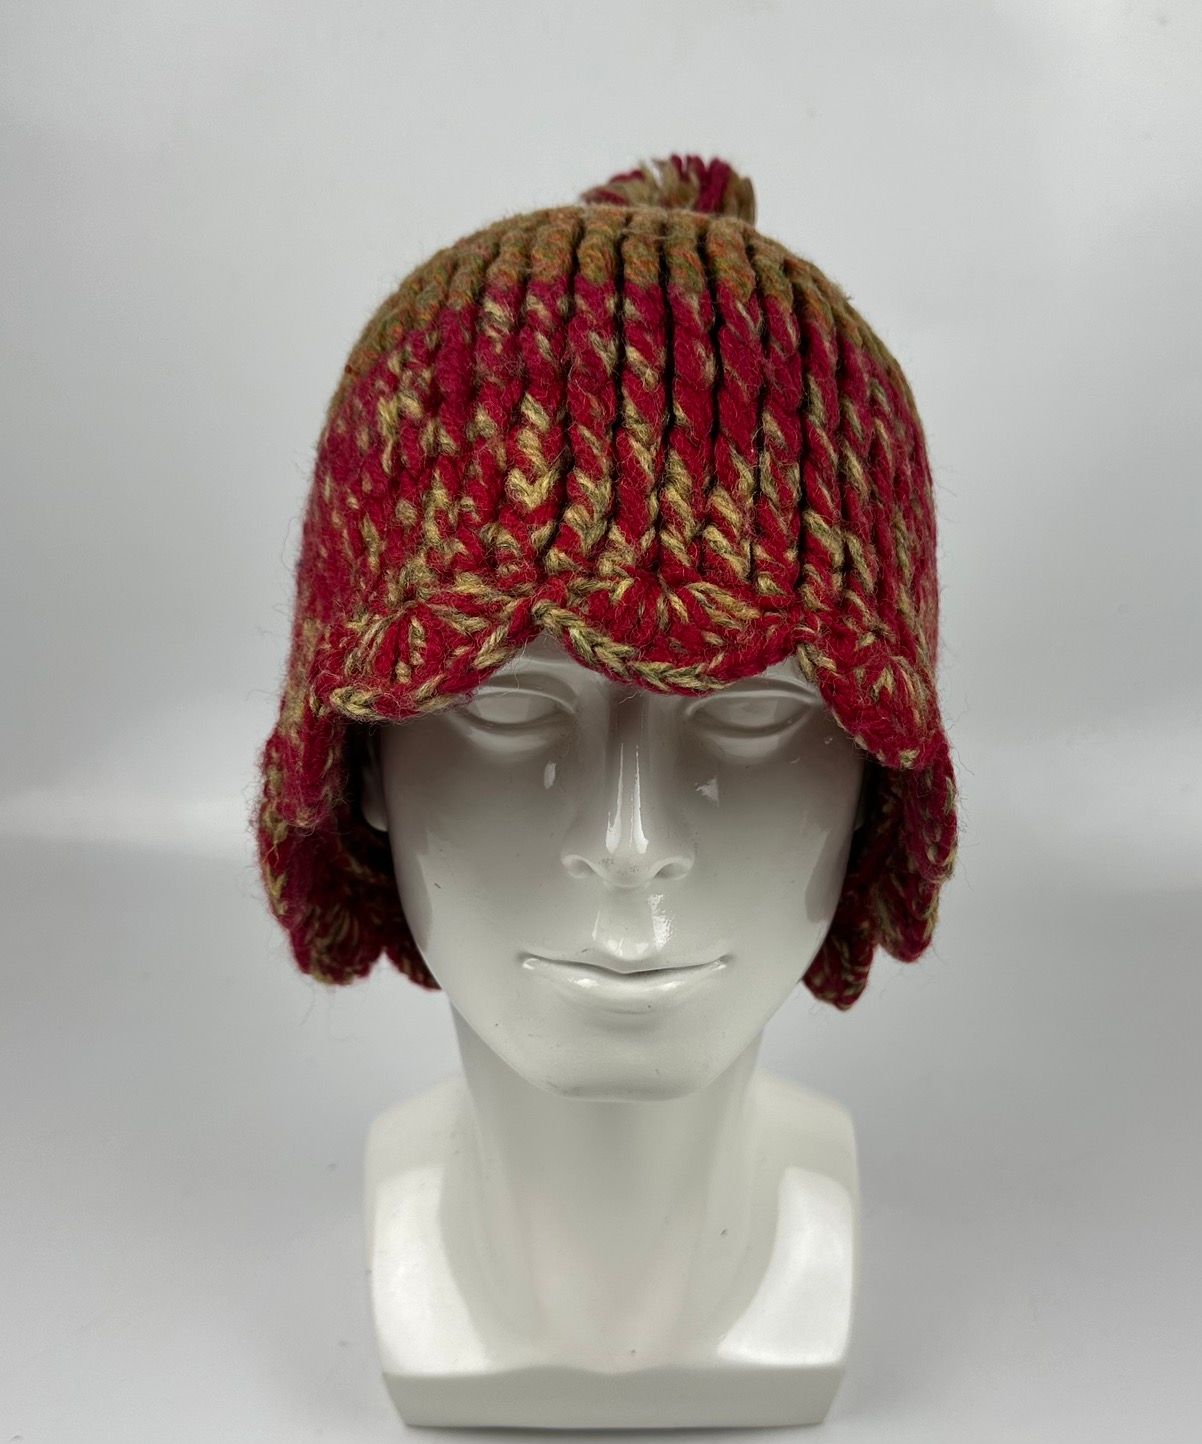 custom made knitted hat tg3 - 2